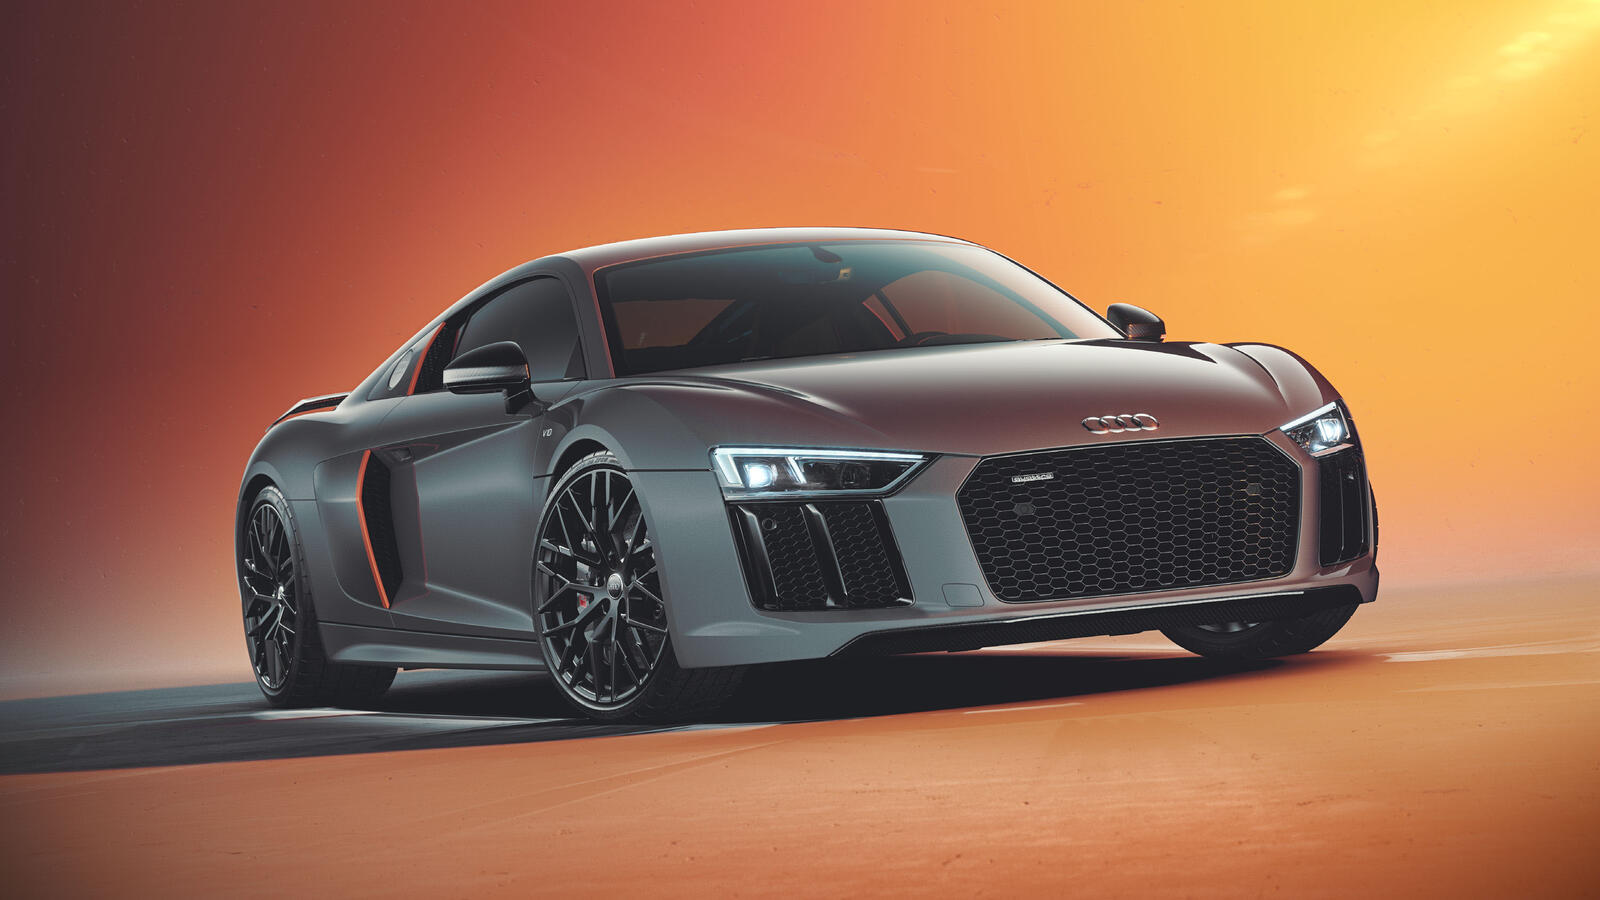 Wallpapers Audi R8 cars coupe on the desktop